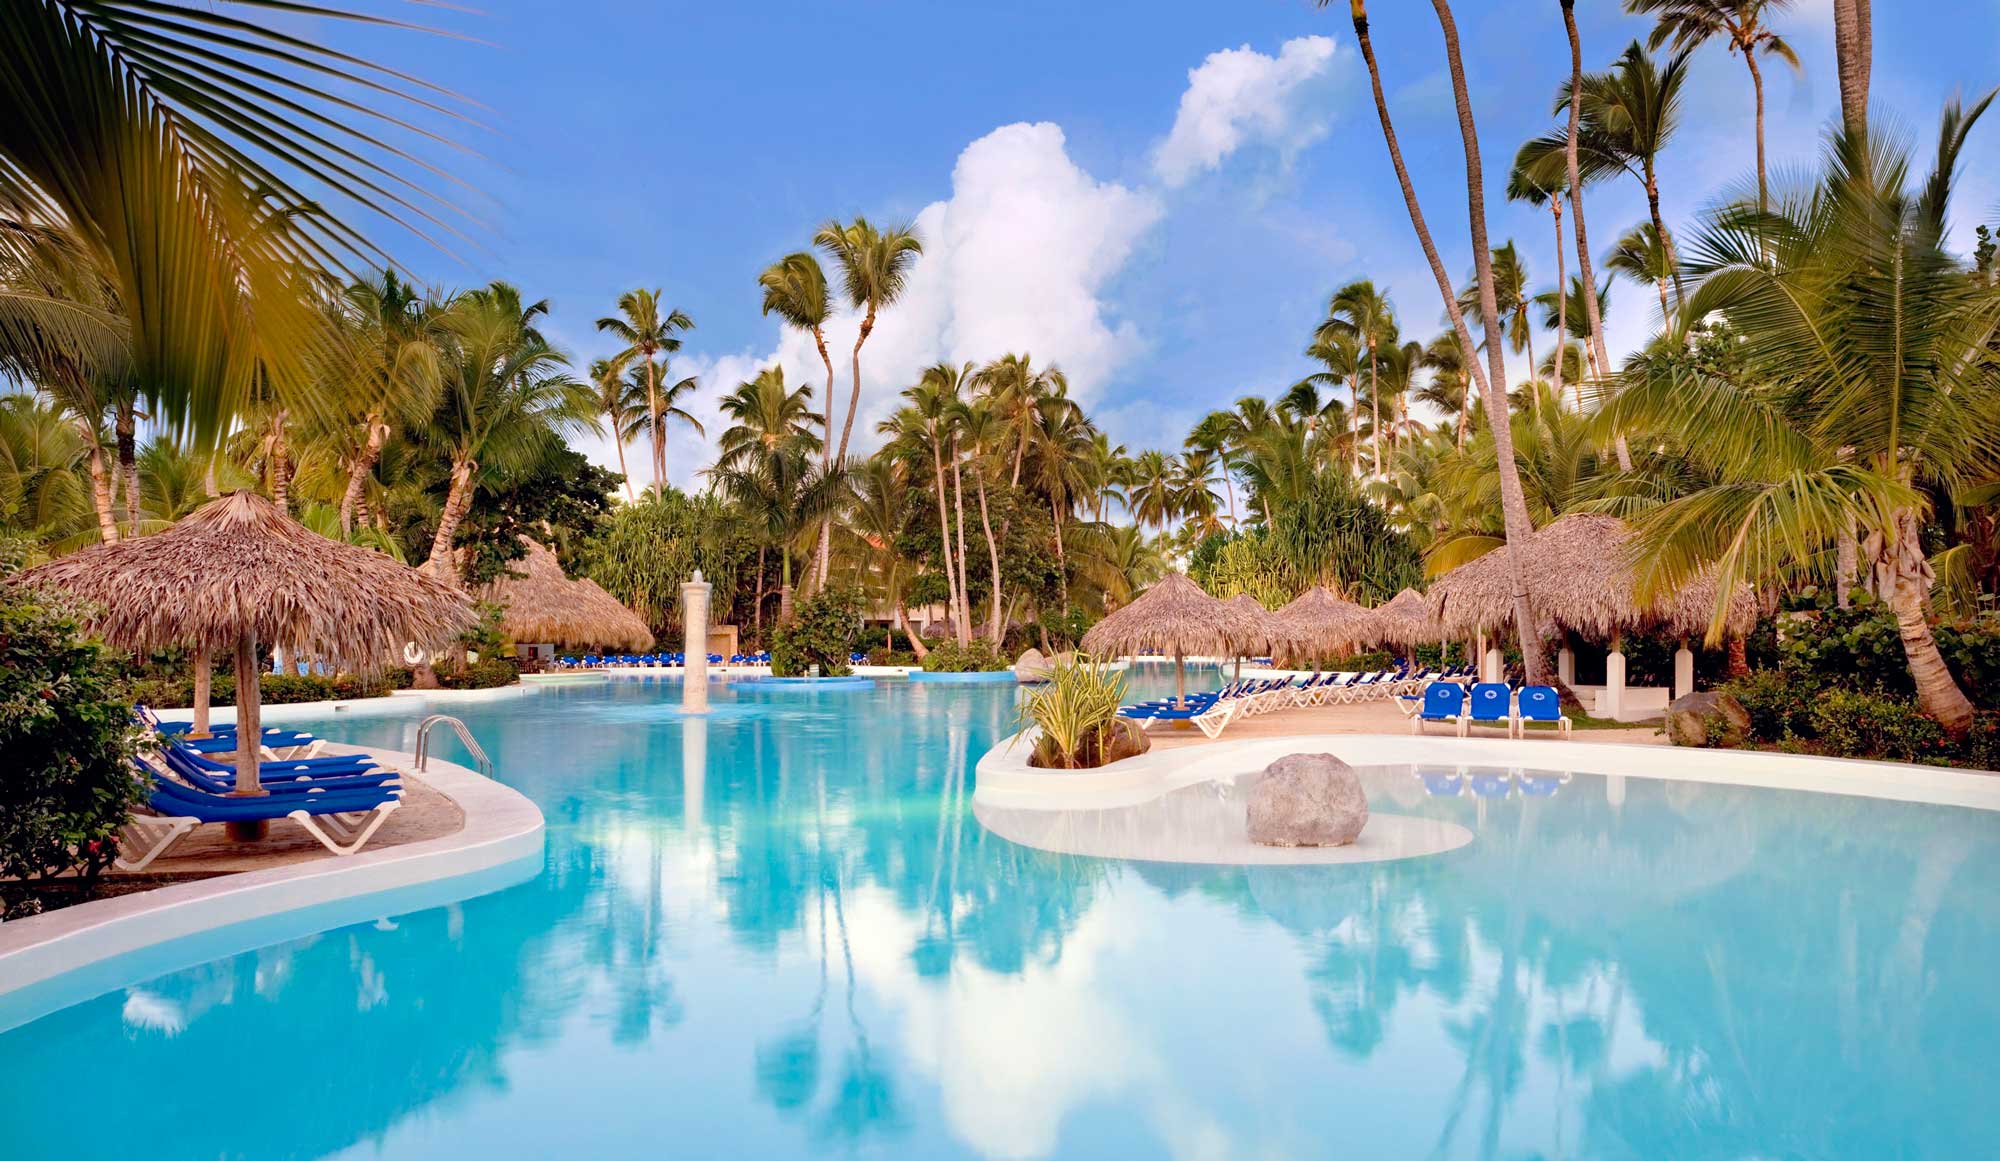 Best All-Inclusive Resorts in the Dominican Republic | All-Inclusive Weddings | All-Inclusive Honeymoons | Melia Caribe Tropical